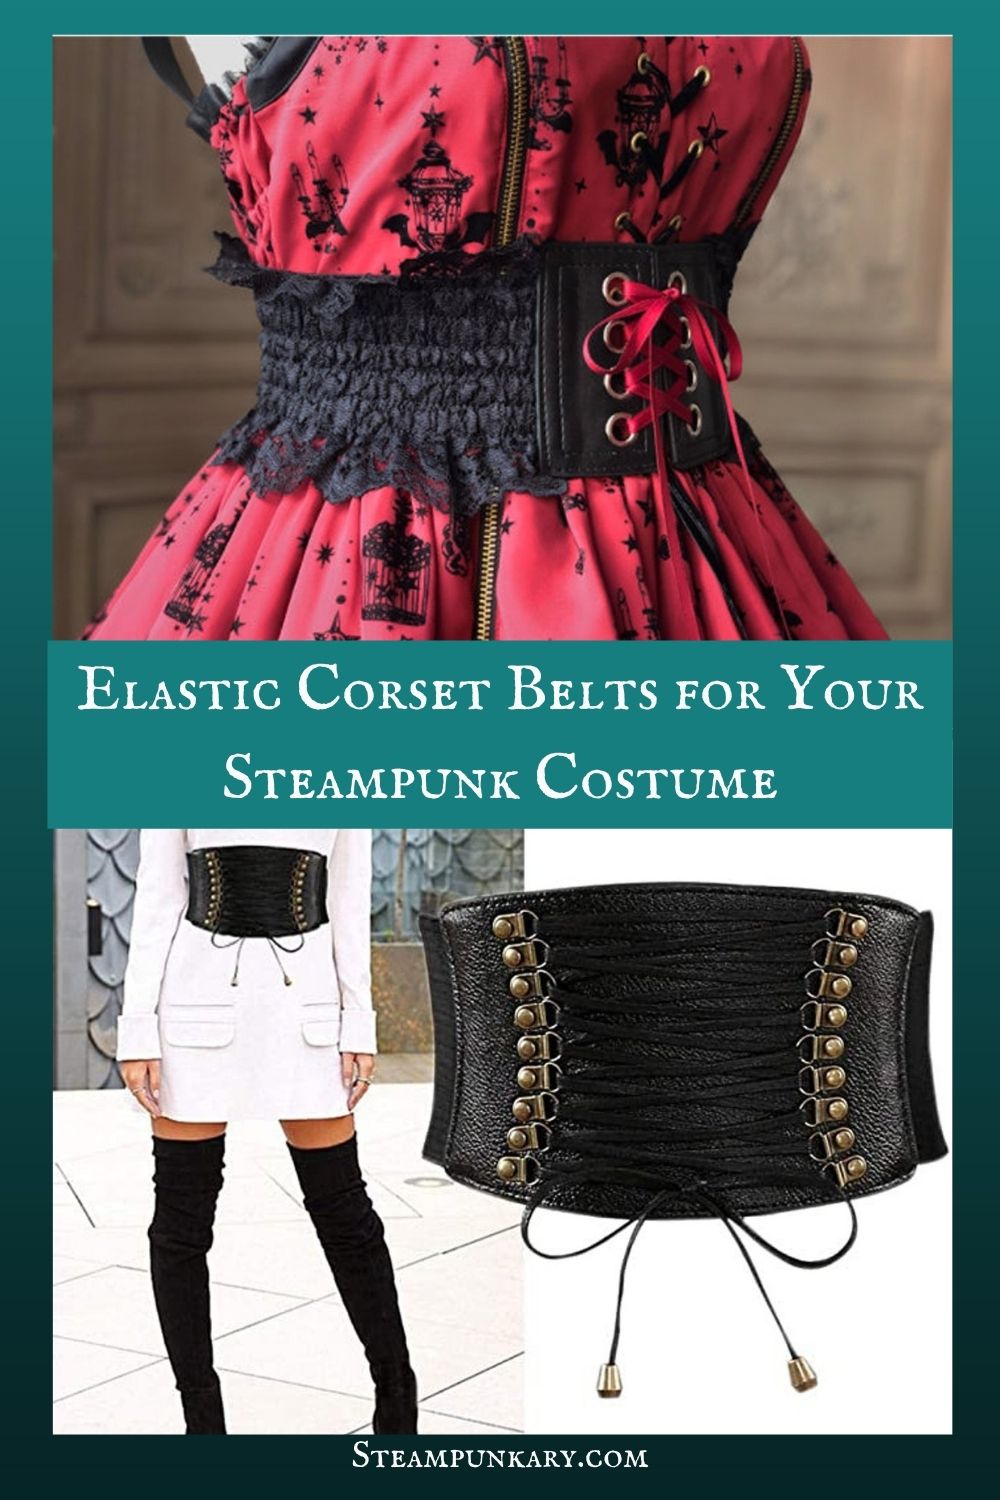 Elastic Corset Belts for Your Steampunk Costume